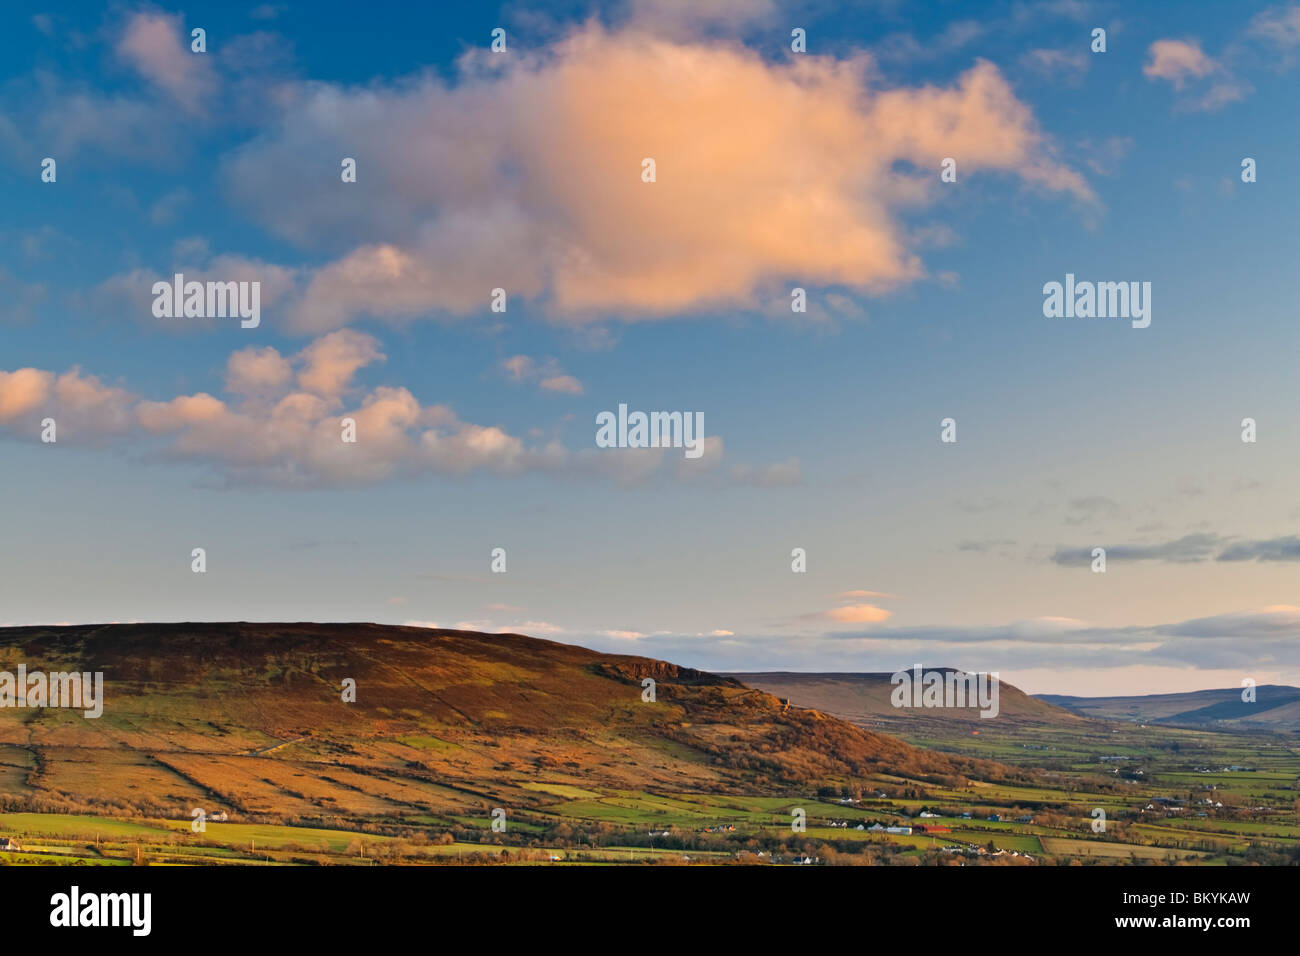 Colourful sunset over Keady Mountain near Limavady in the Binevenagh region of County Derry, Northern Ireland Stock Photo